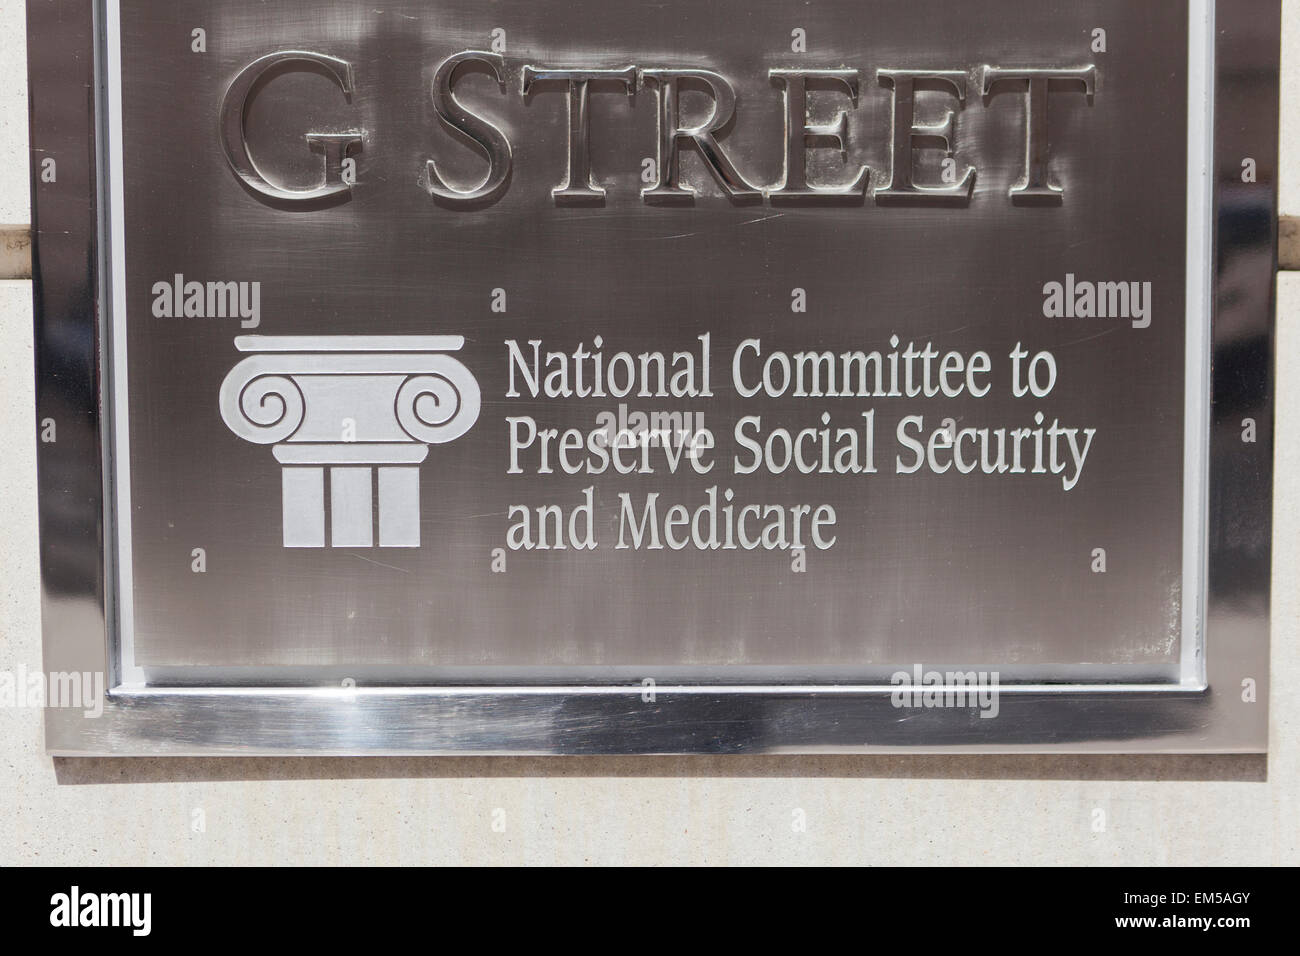 National Committee to Preserve Social Security and Medicare - Washington, DC USA Stock Photo